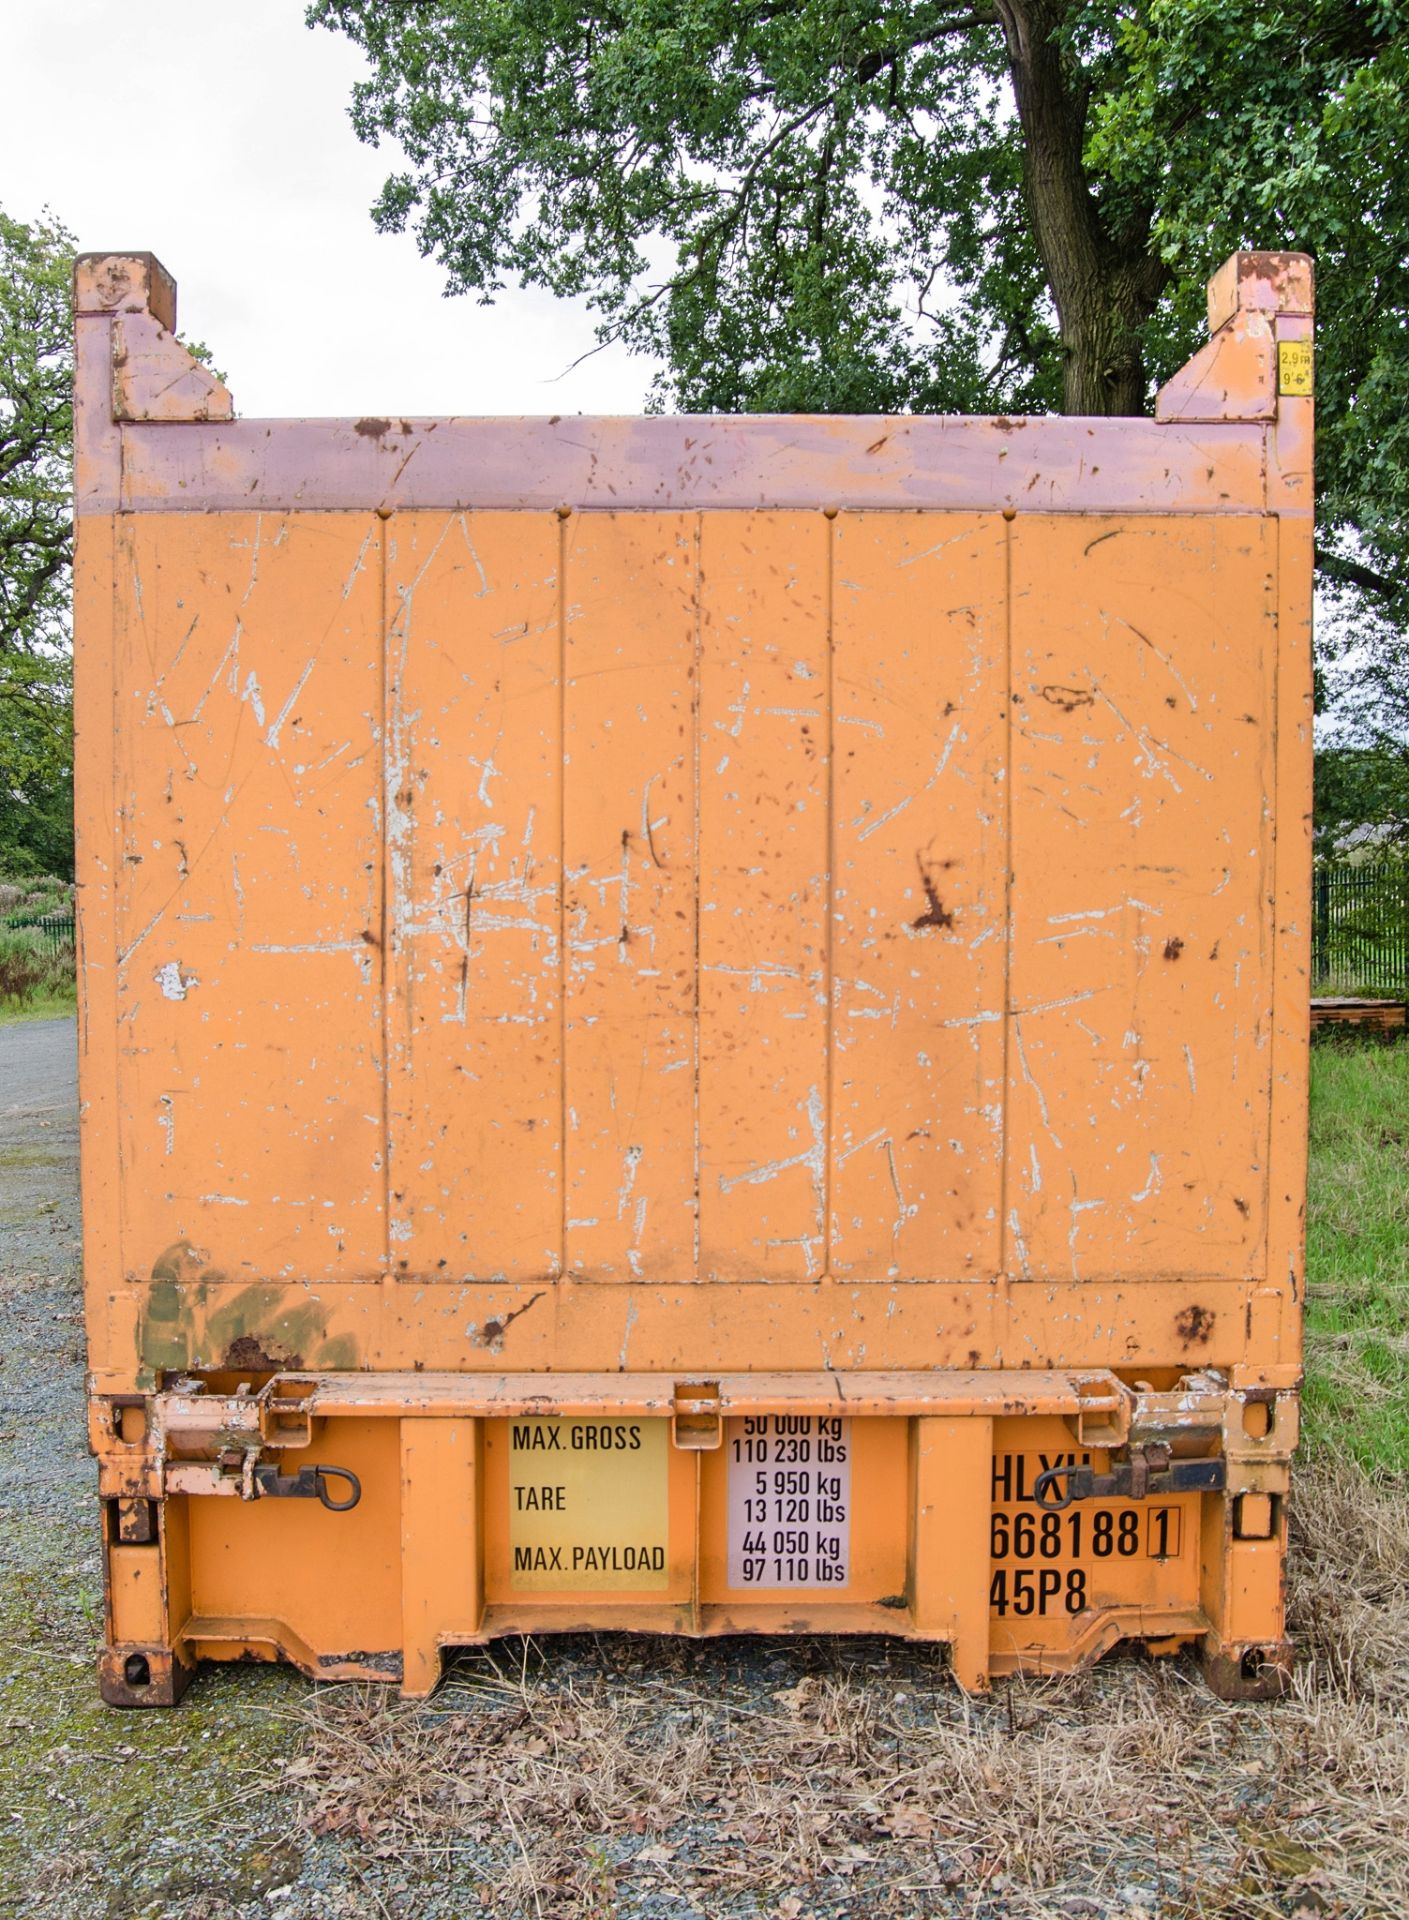 50 tonne flat rack container - Image 9 of 9